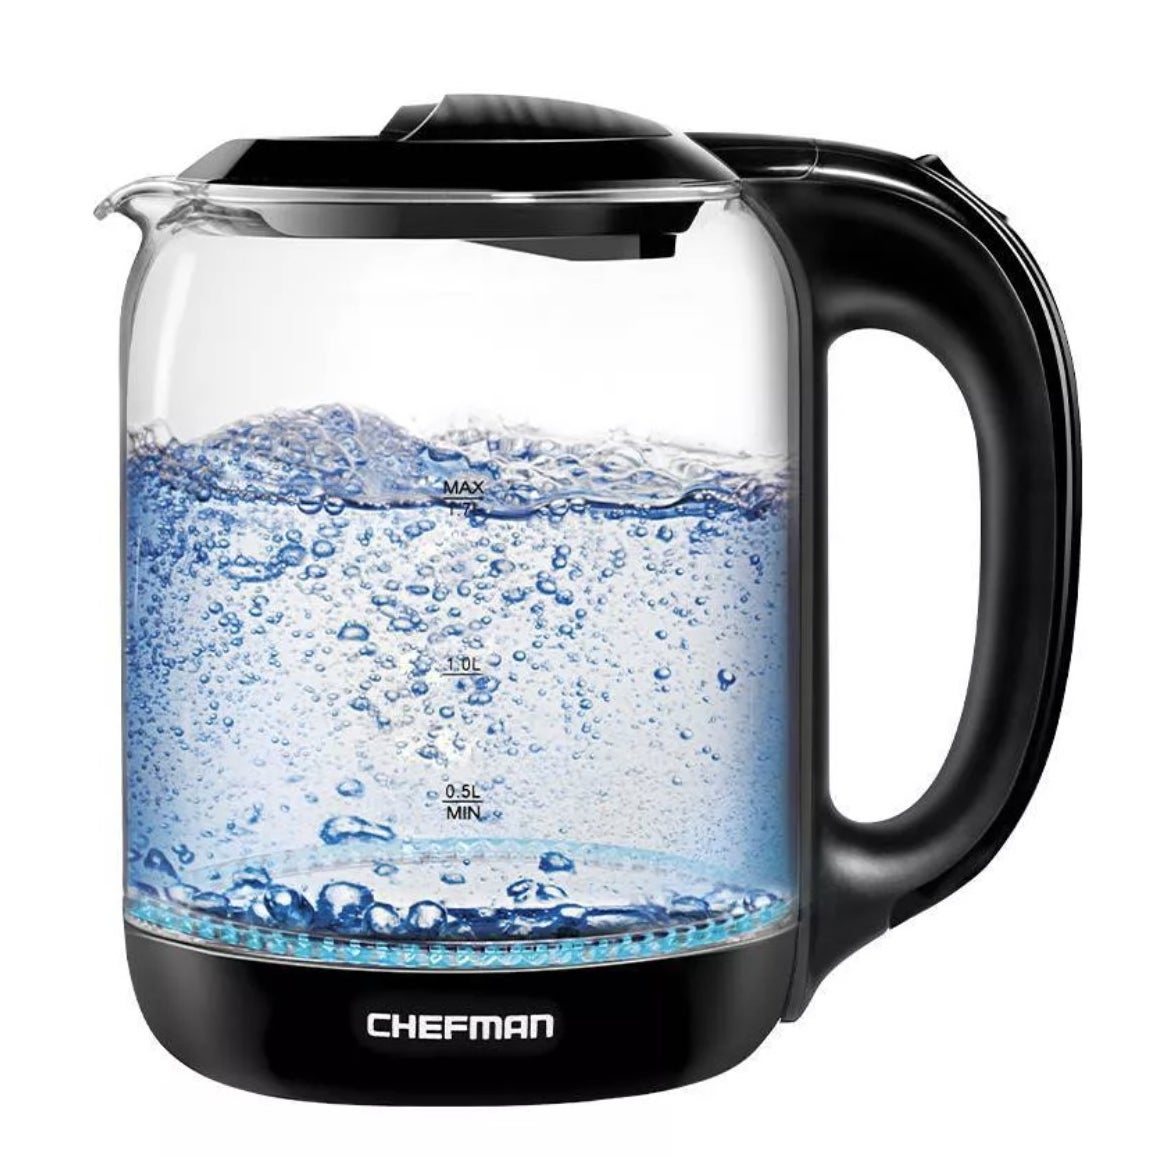 A black and clear glass electric kettle with boiling water inside